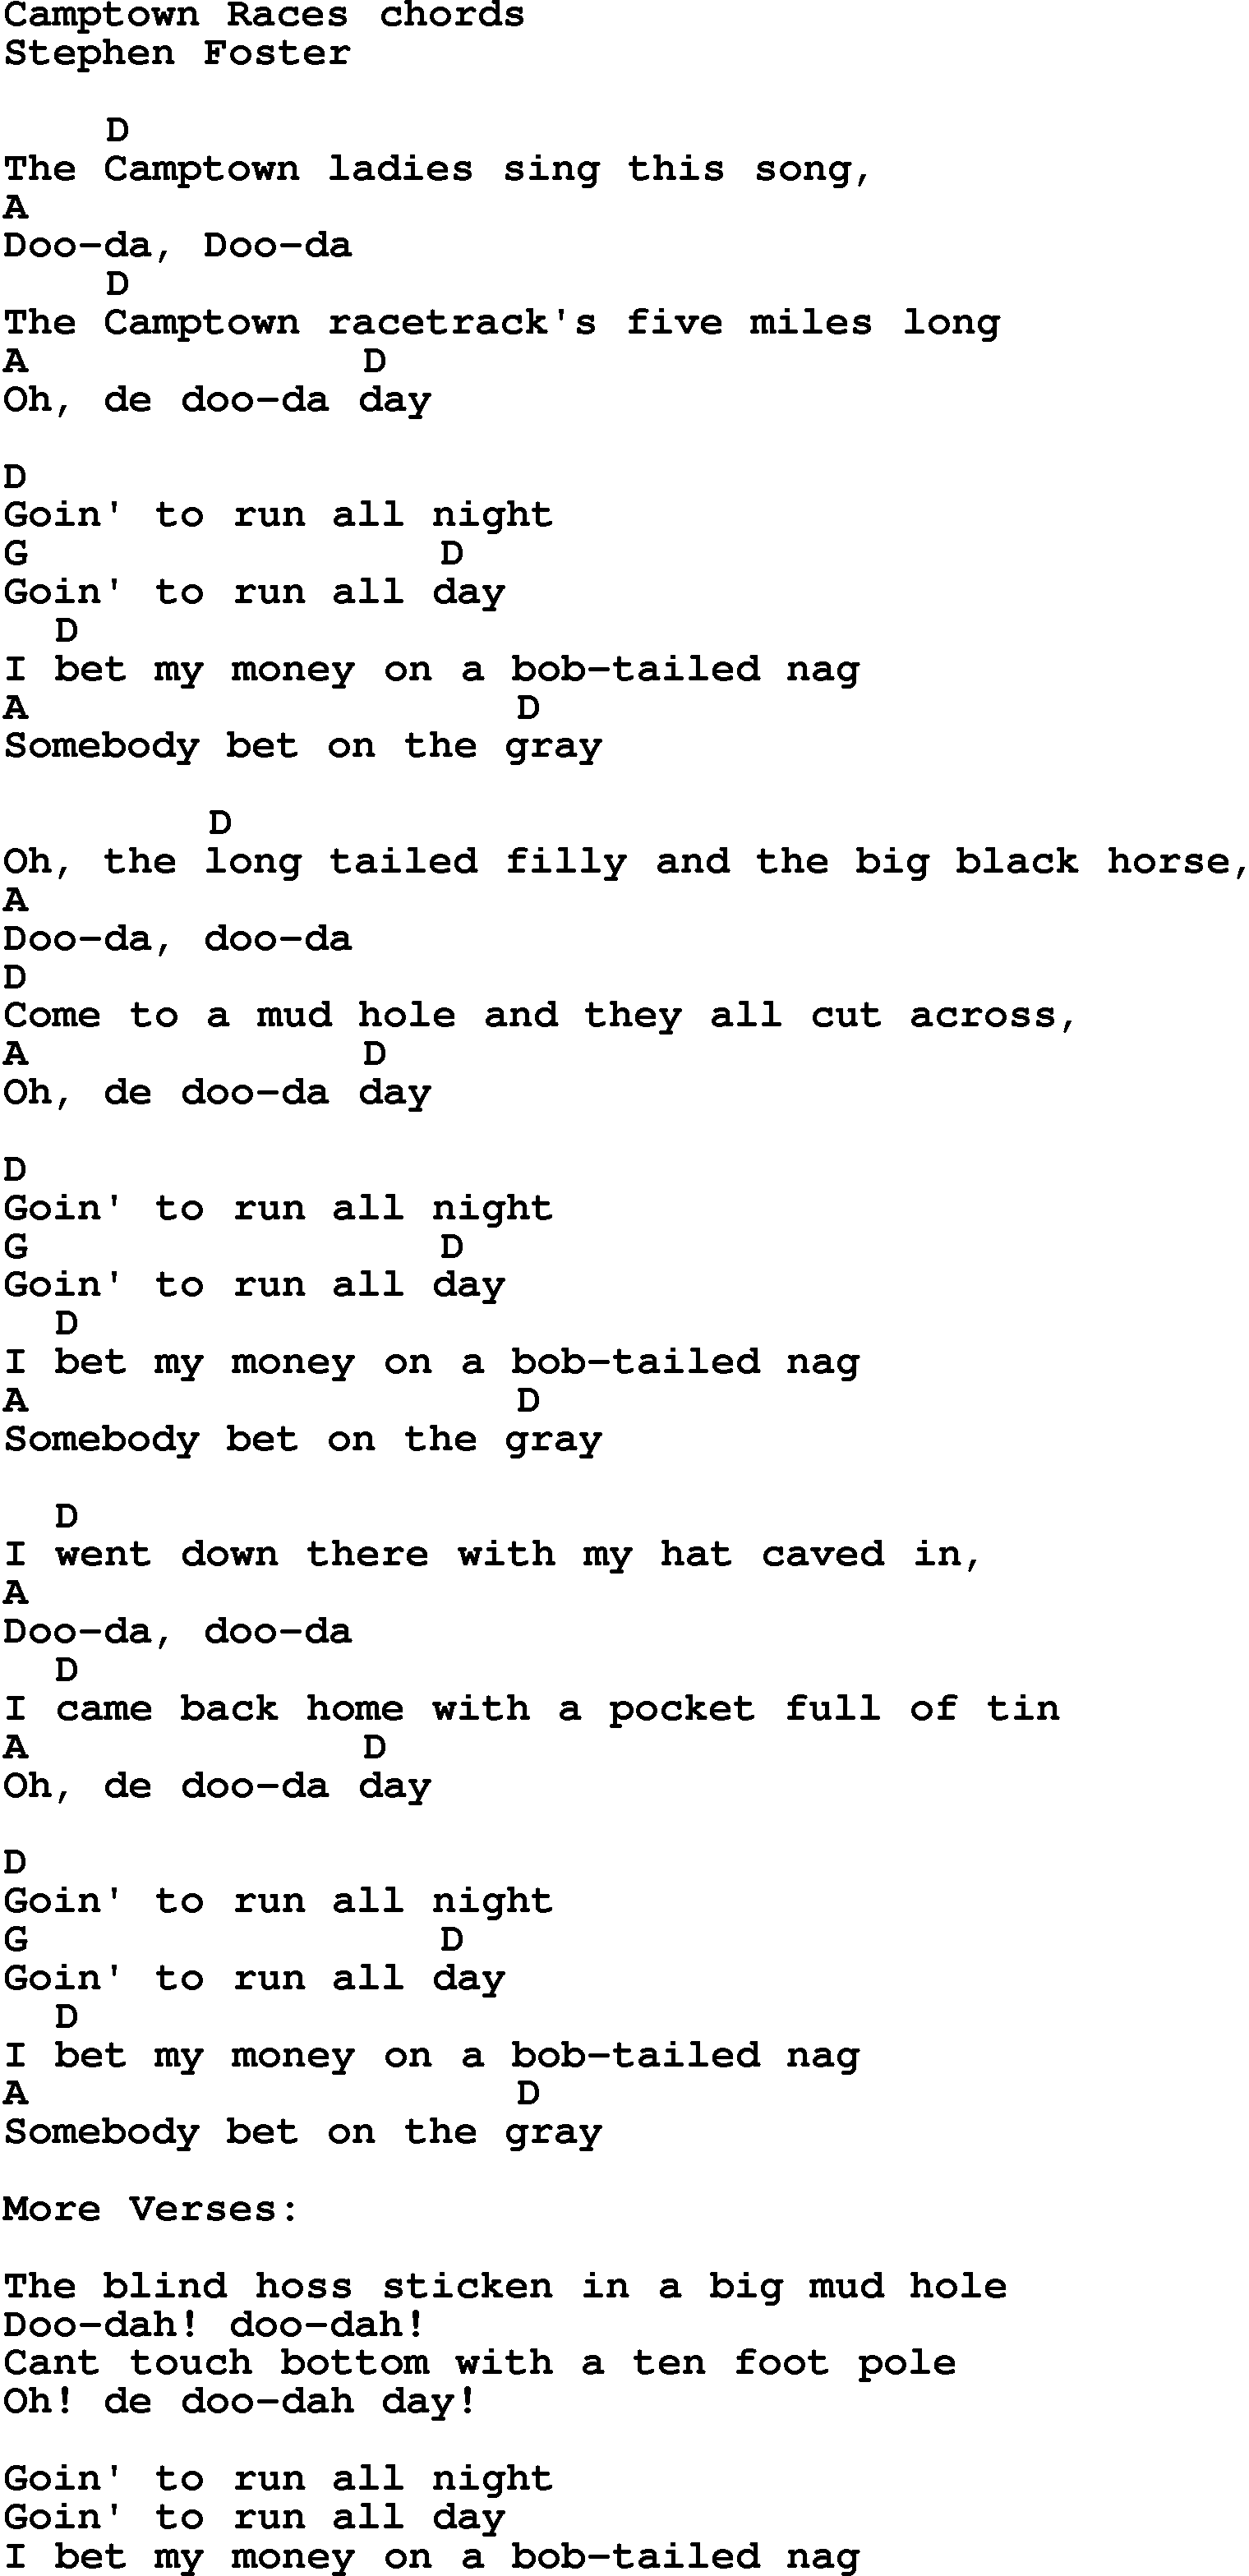 Song Lyrics with guitar chords for Camptown Races